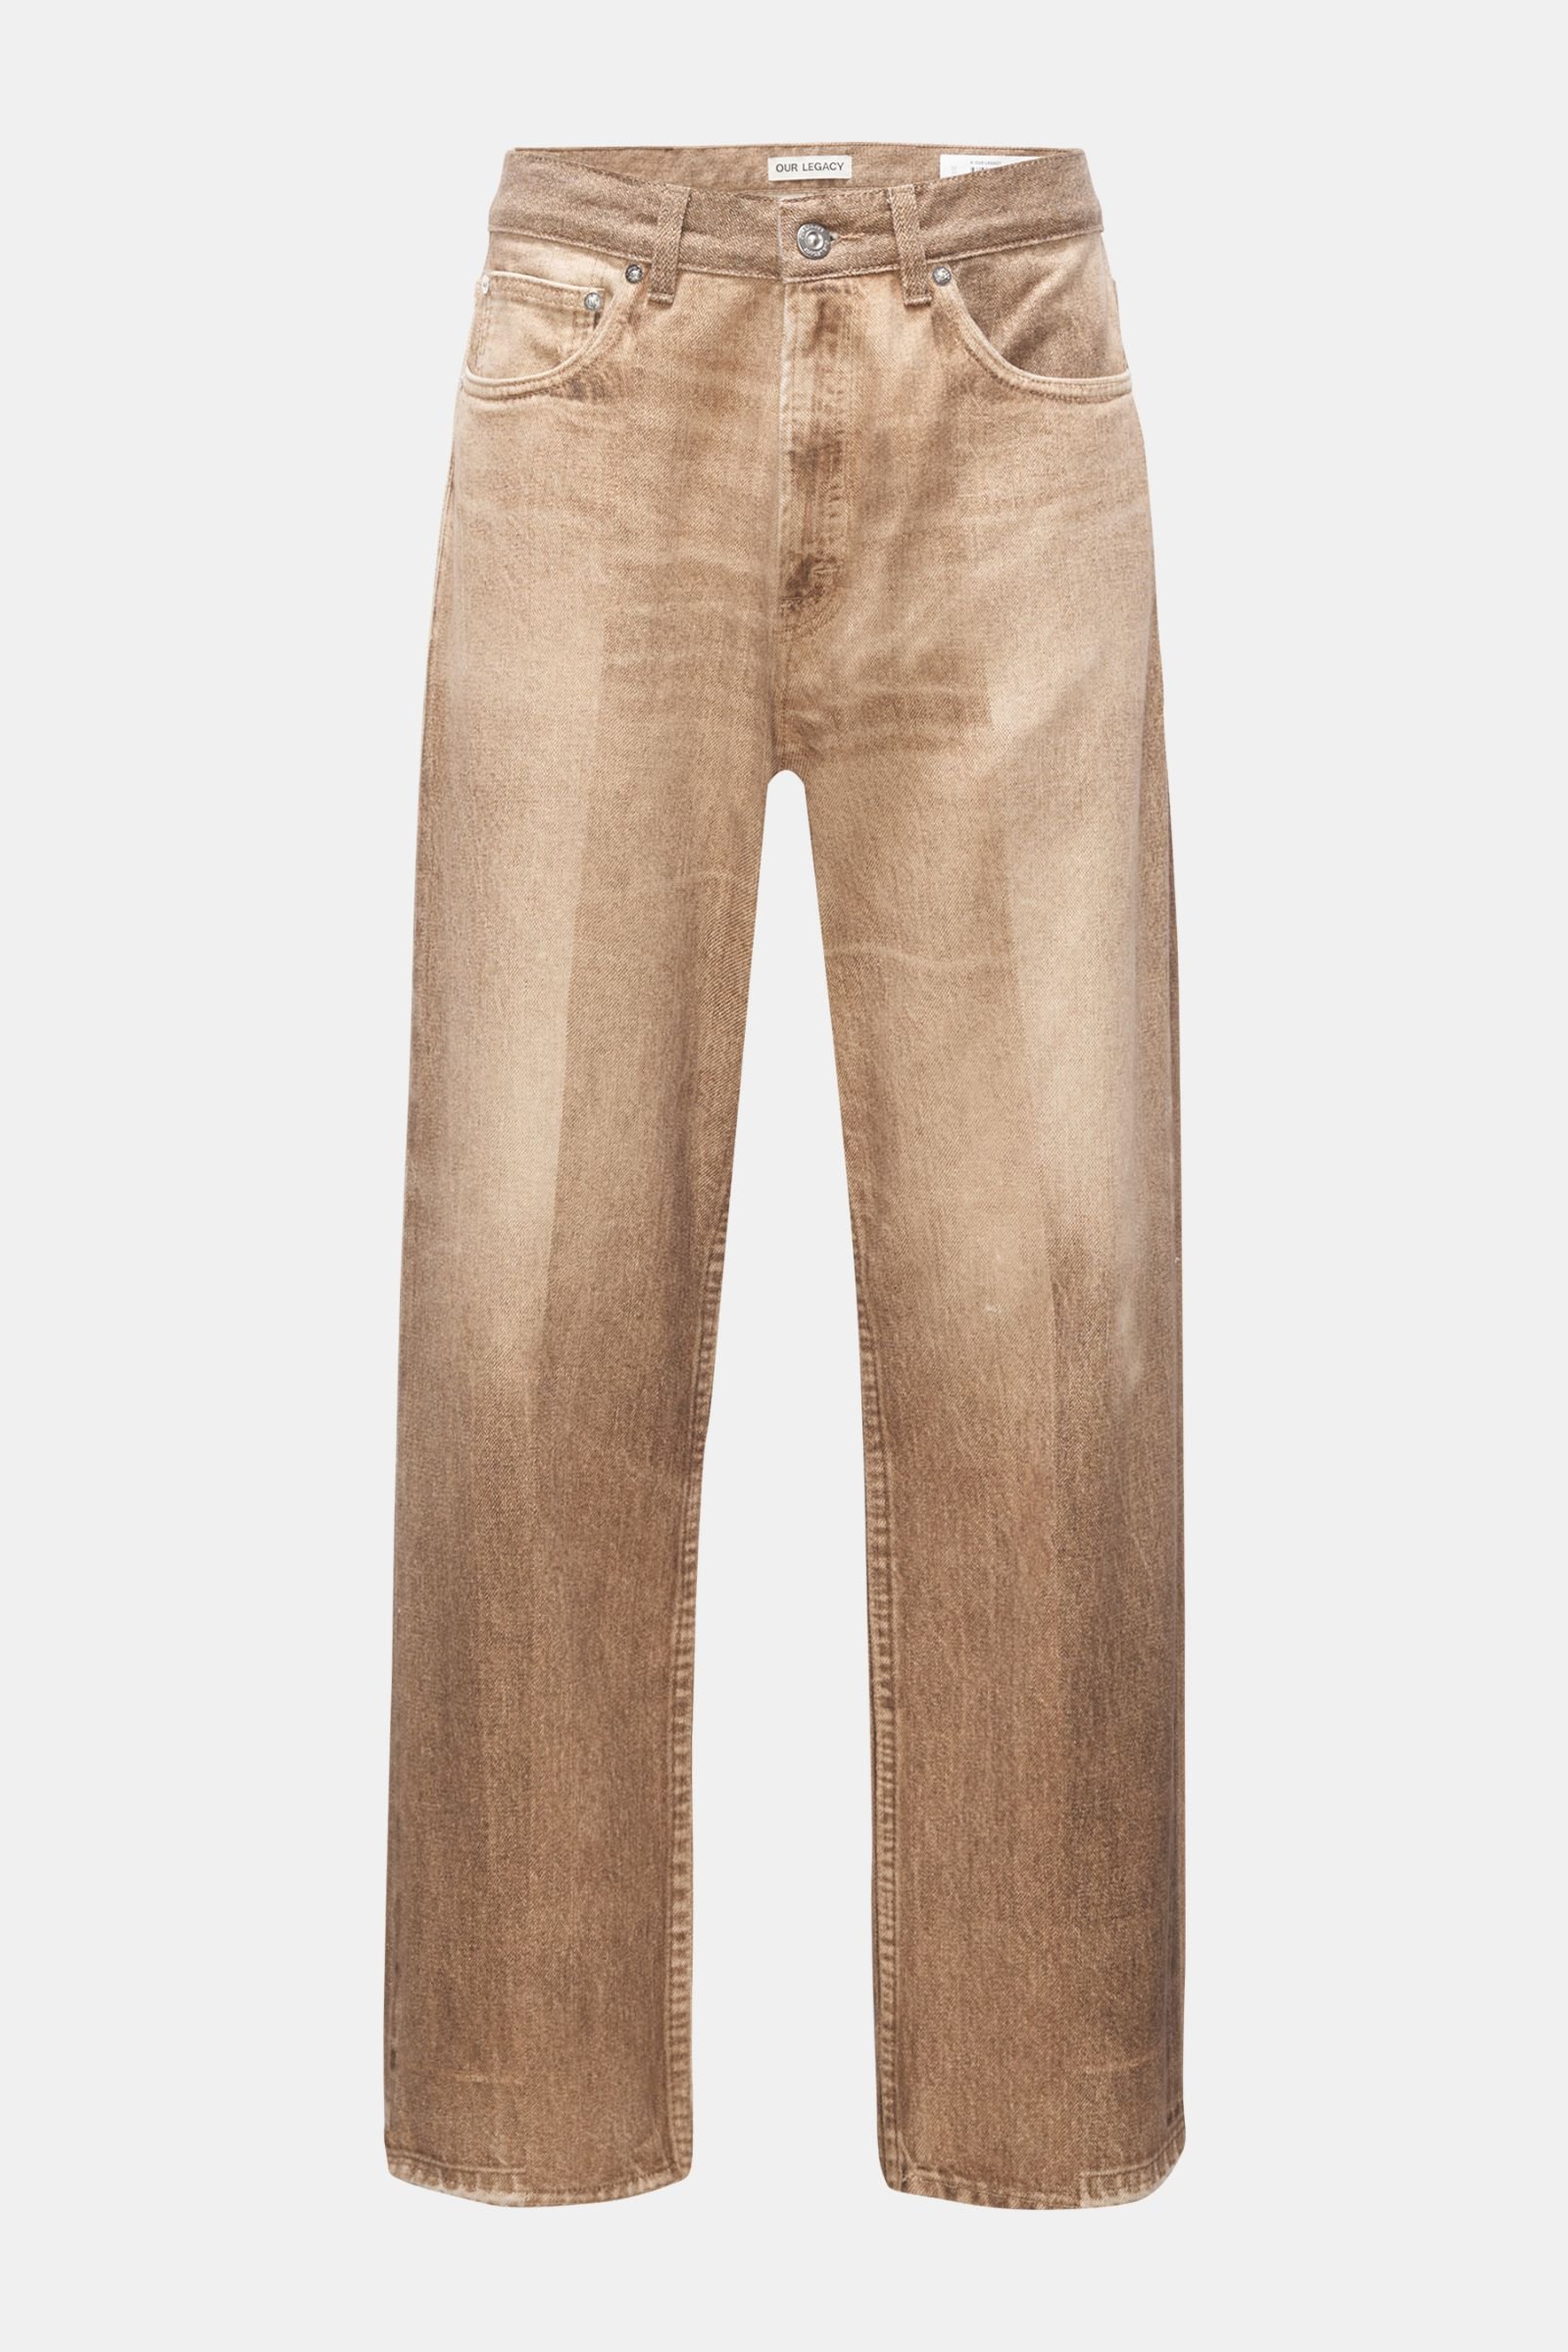 Jeans 'Third Cut' beige/brown patterned